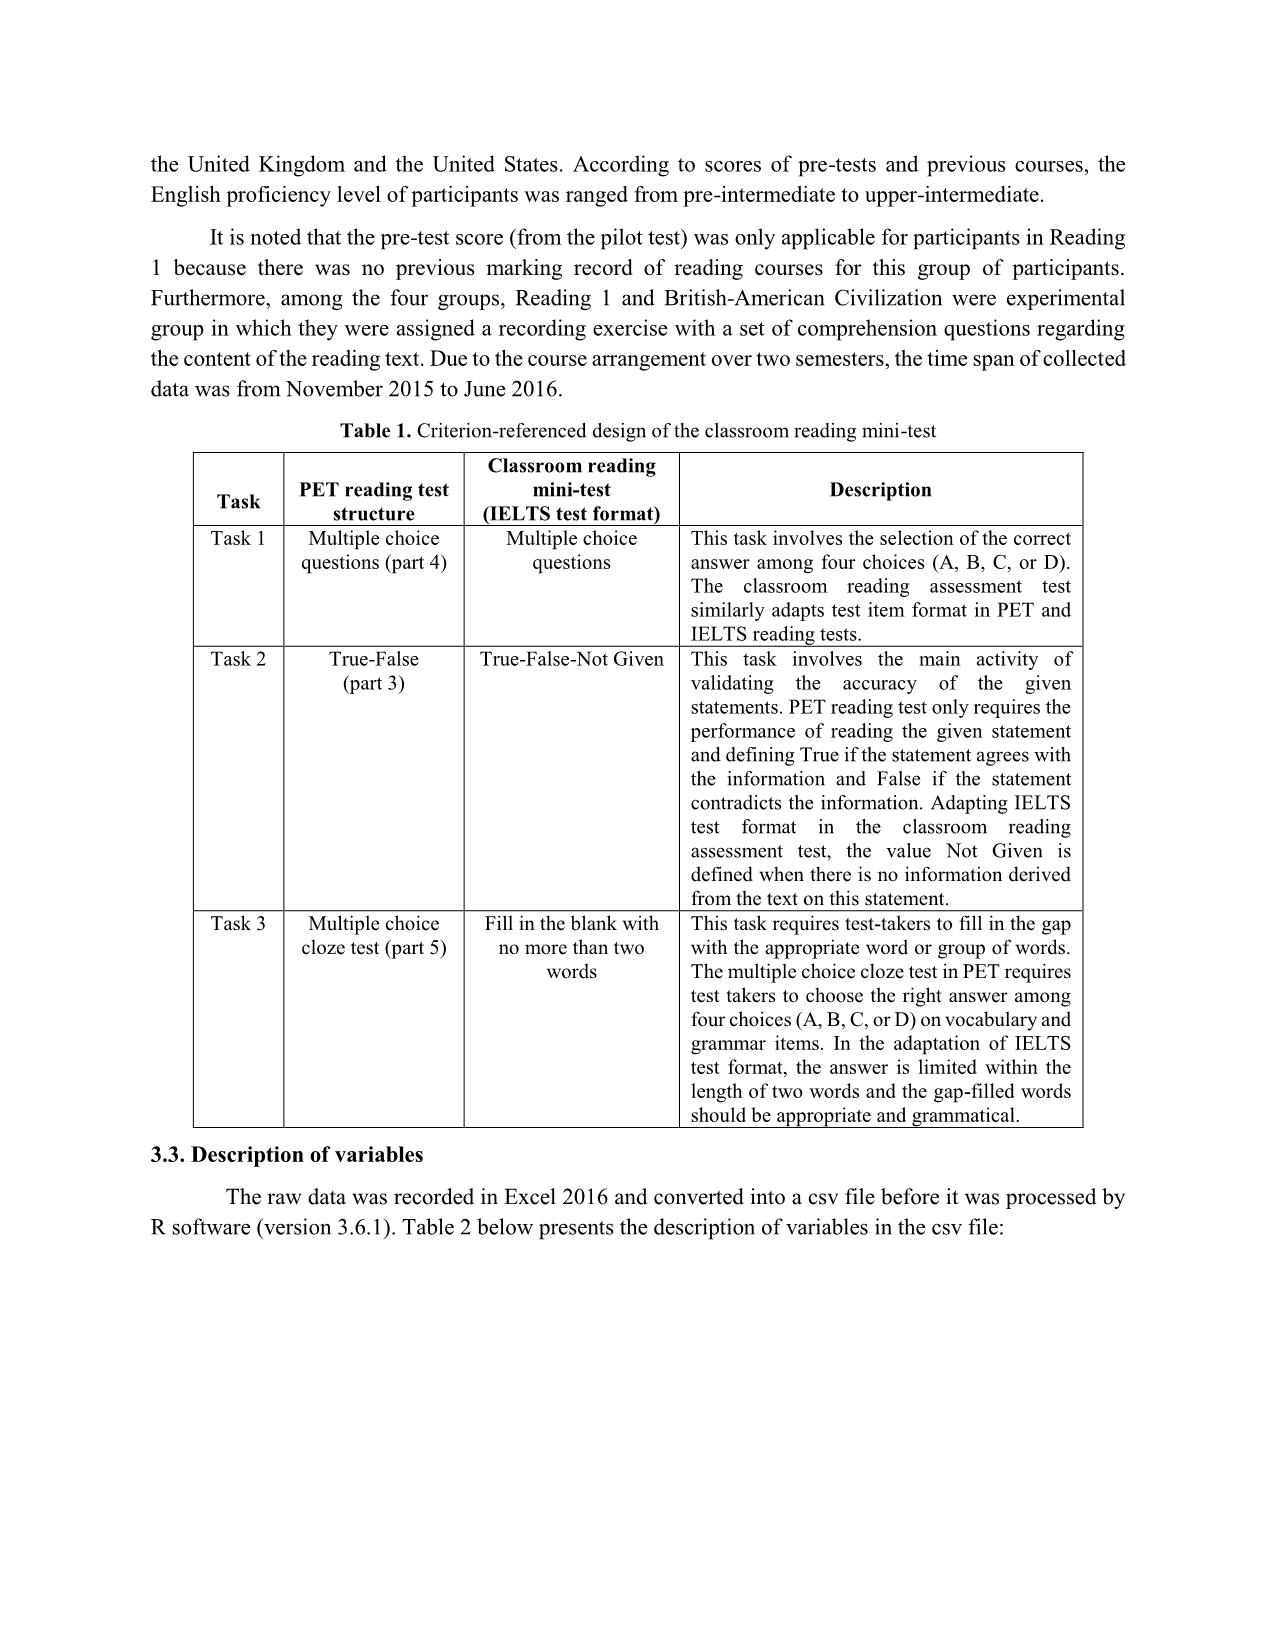 Implicating the integrated format on reading test assessment: An evaluation of relevant factors trang 3